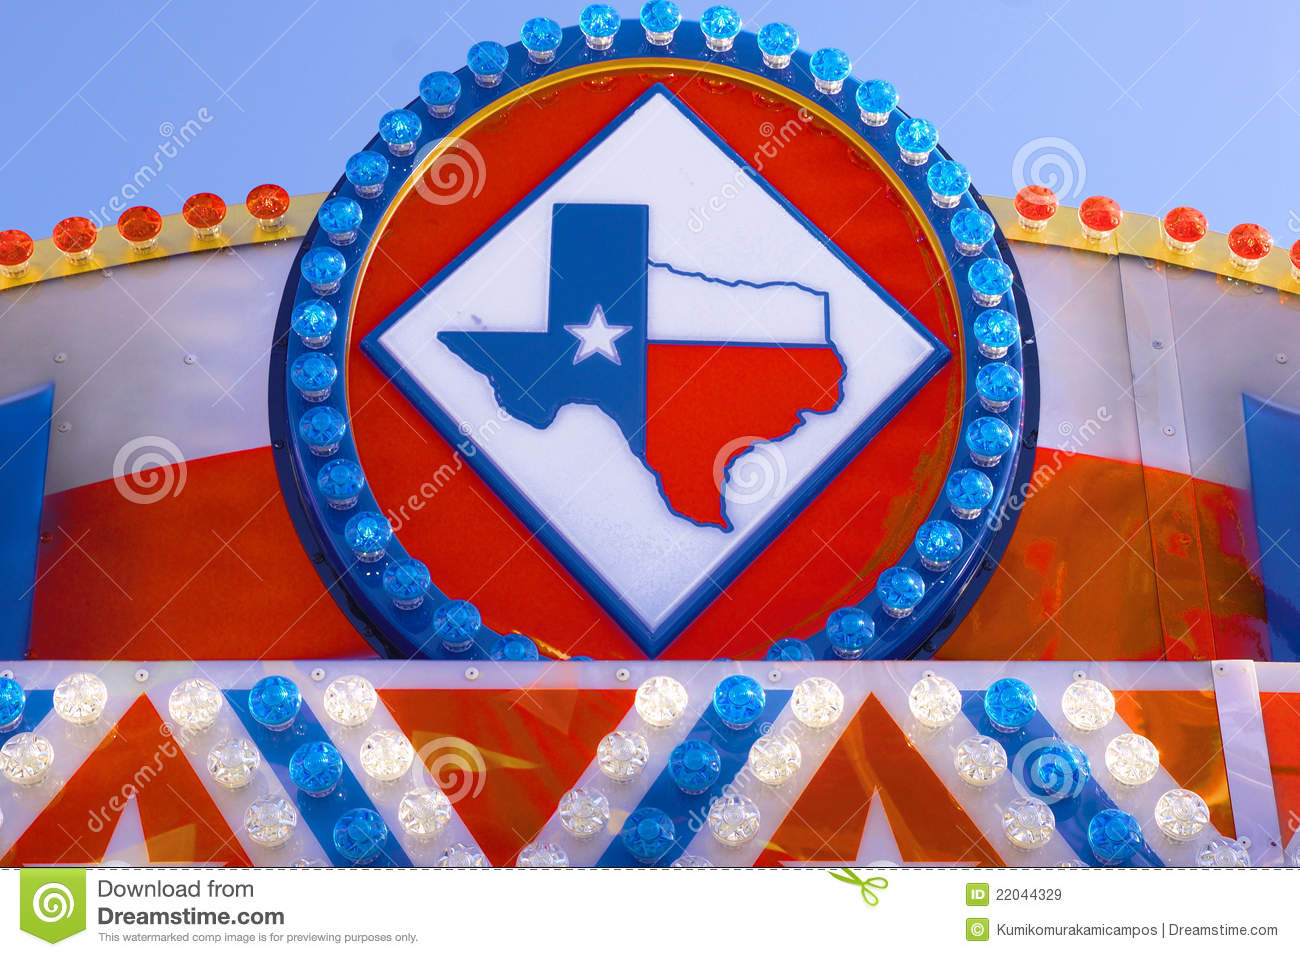 Texas State Fair Royalty Free Stock Images   Image  22044329